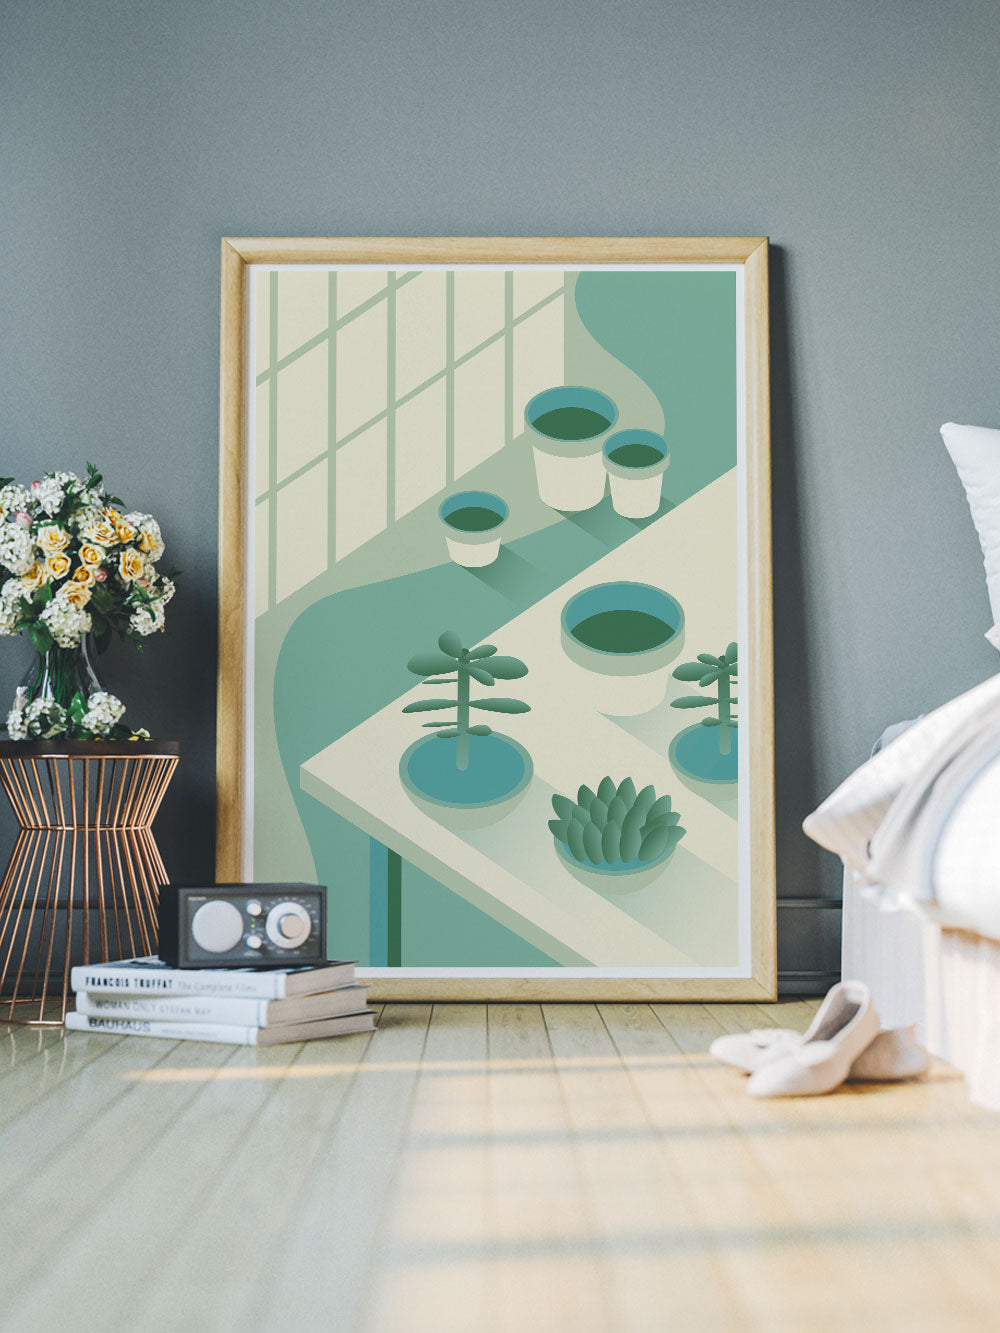 The Potting Shed Plant Art Print in a bedroom